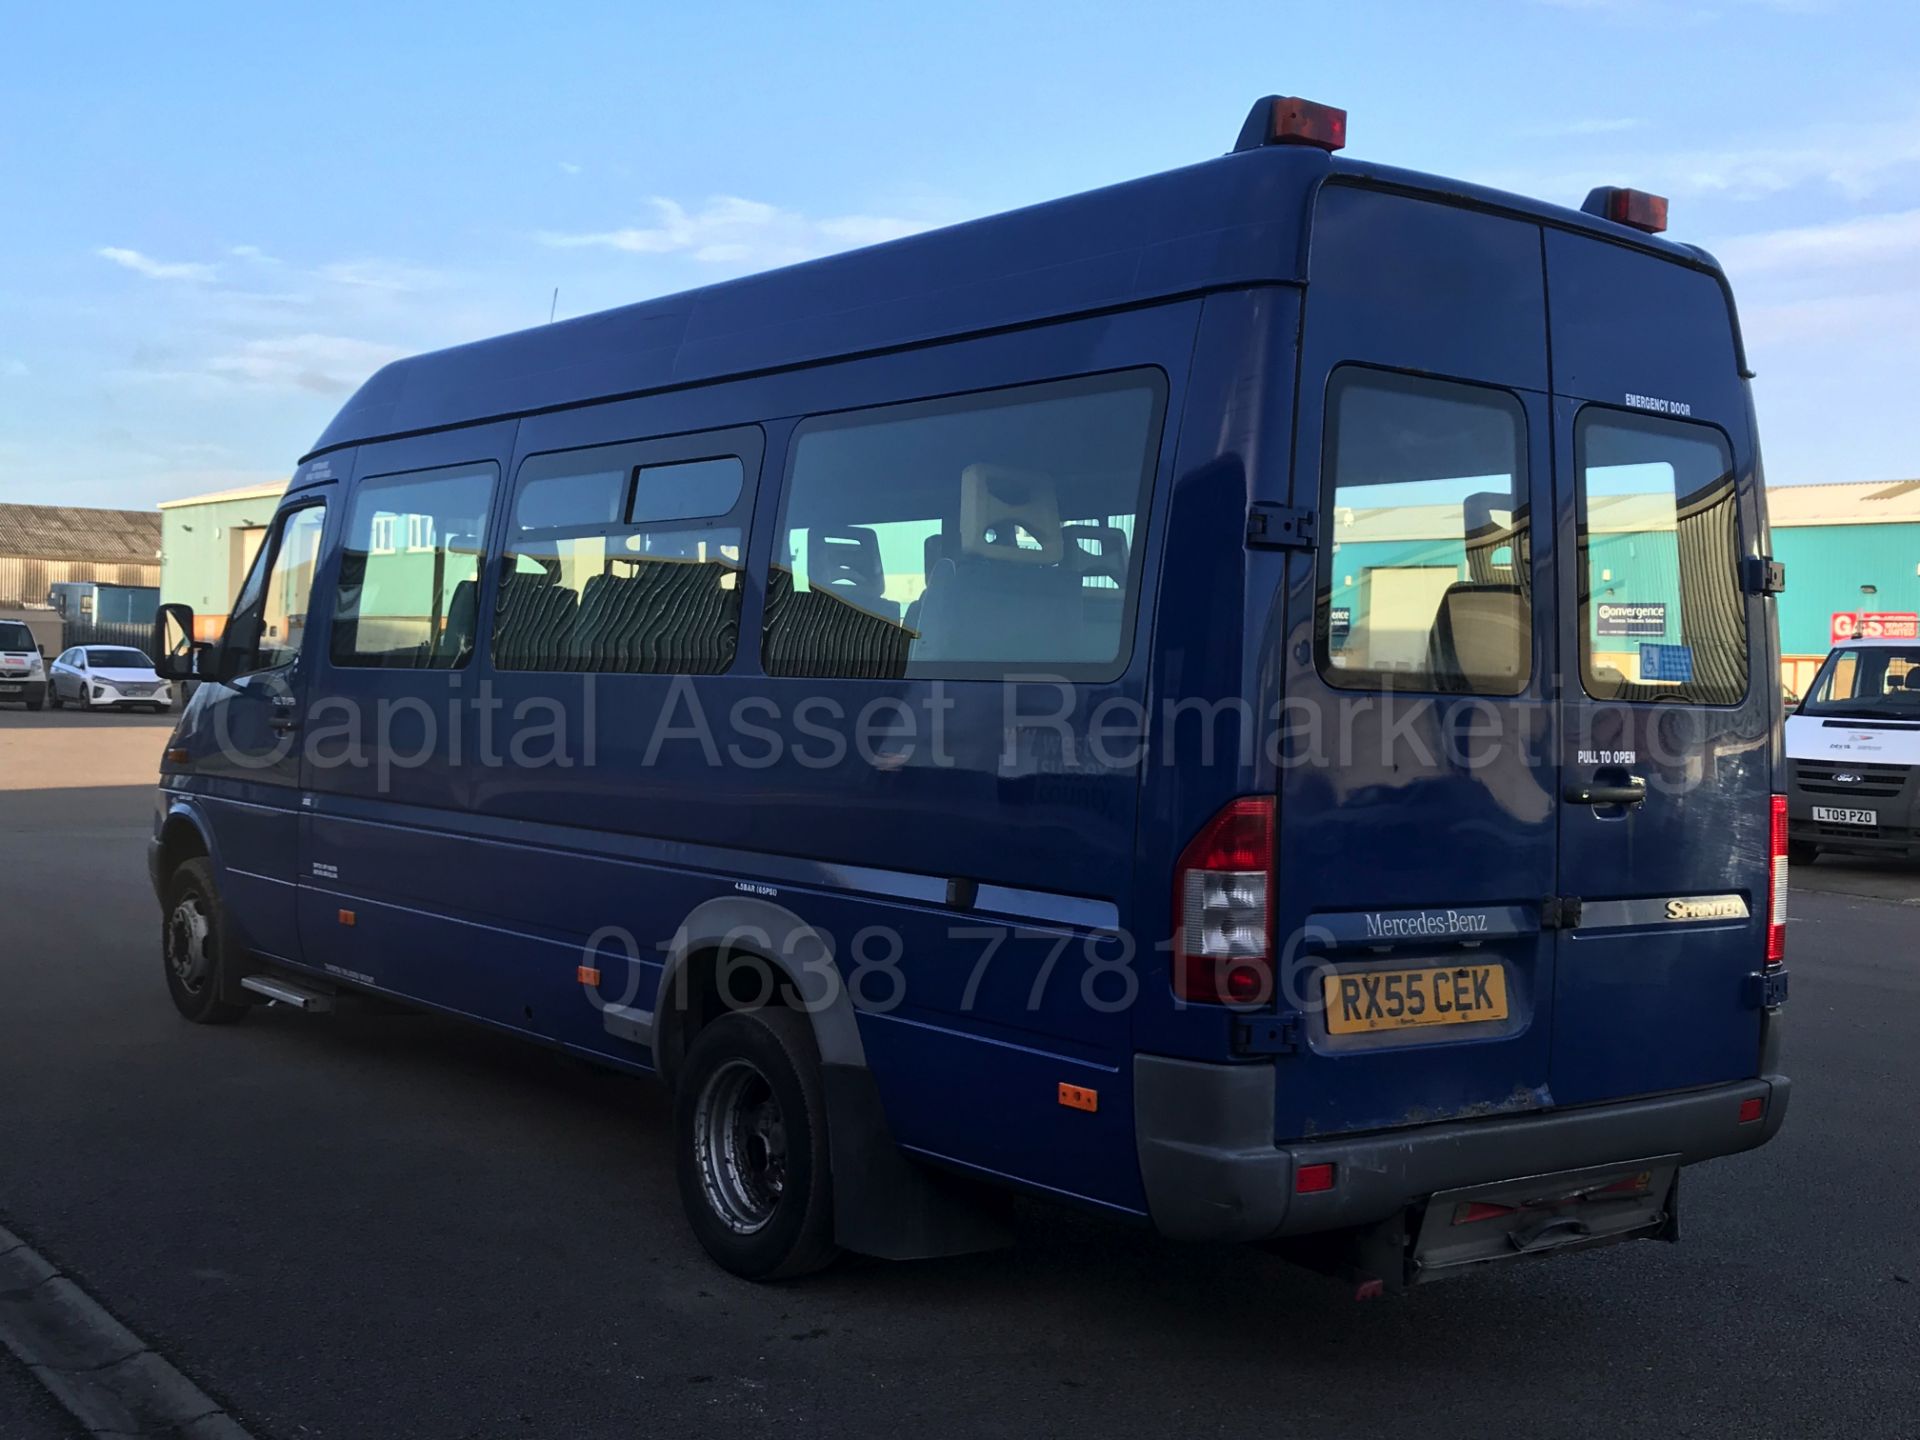 (On Sale) MERCEDES SPRINTER 411 CDI '16 SEATER BUS' (2006 MODEL) 'COACH INTERIOR -CHAIR LIFT' *COIF* - Image 7 of 29